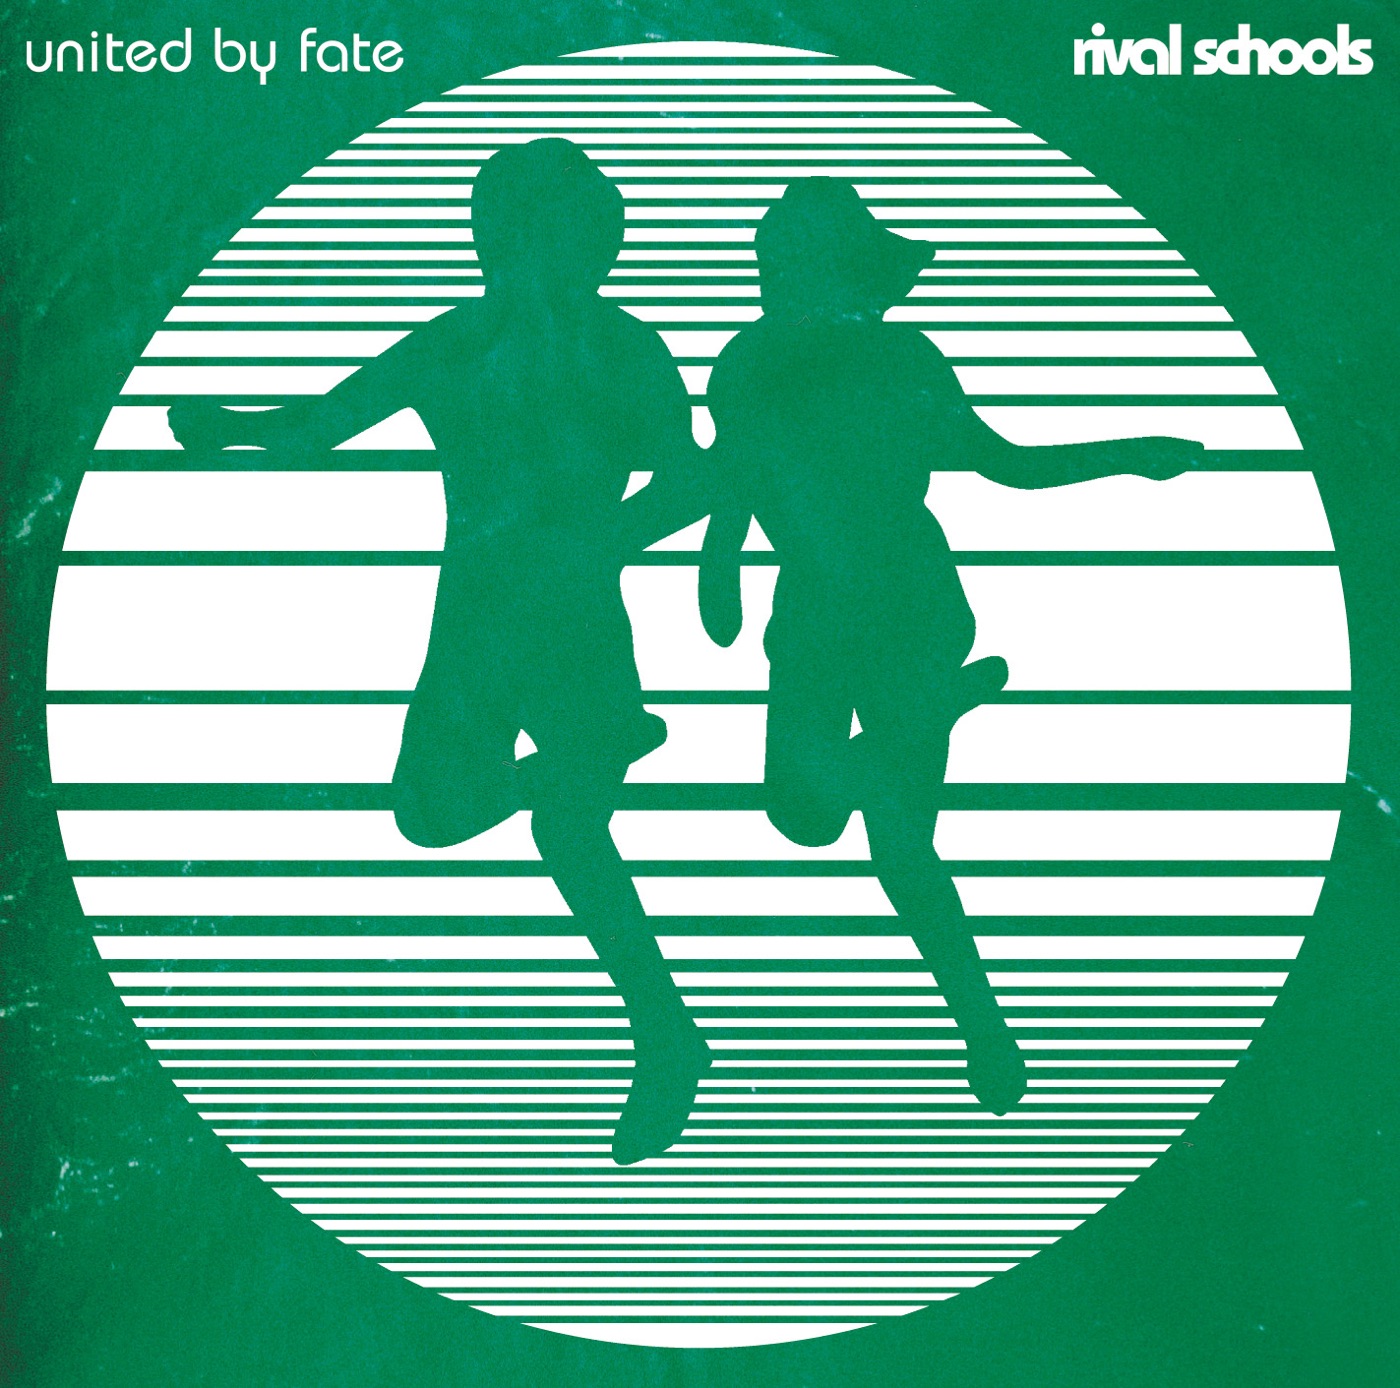 United By Fate by Rival Schools